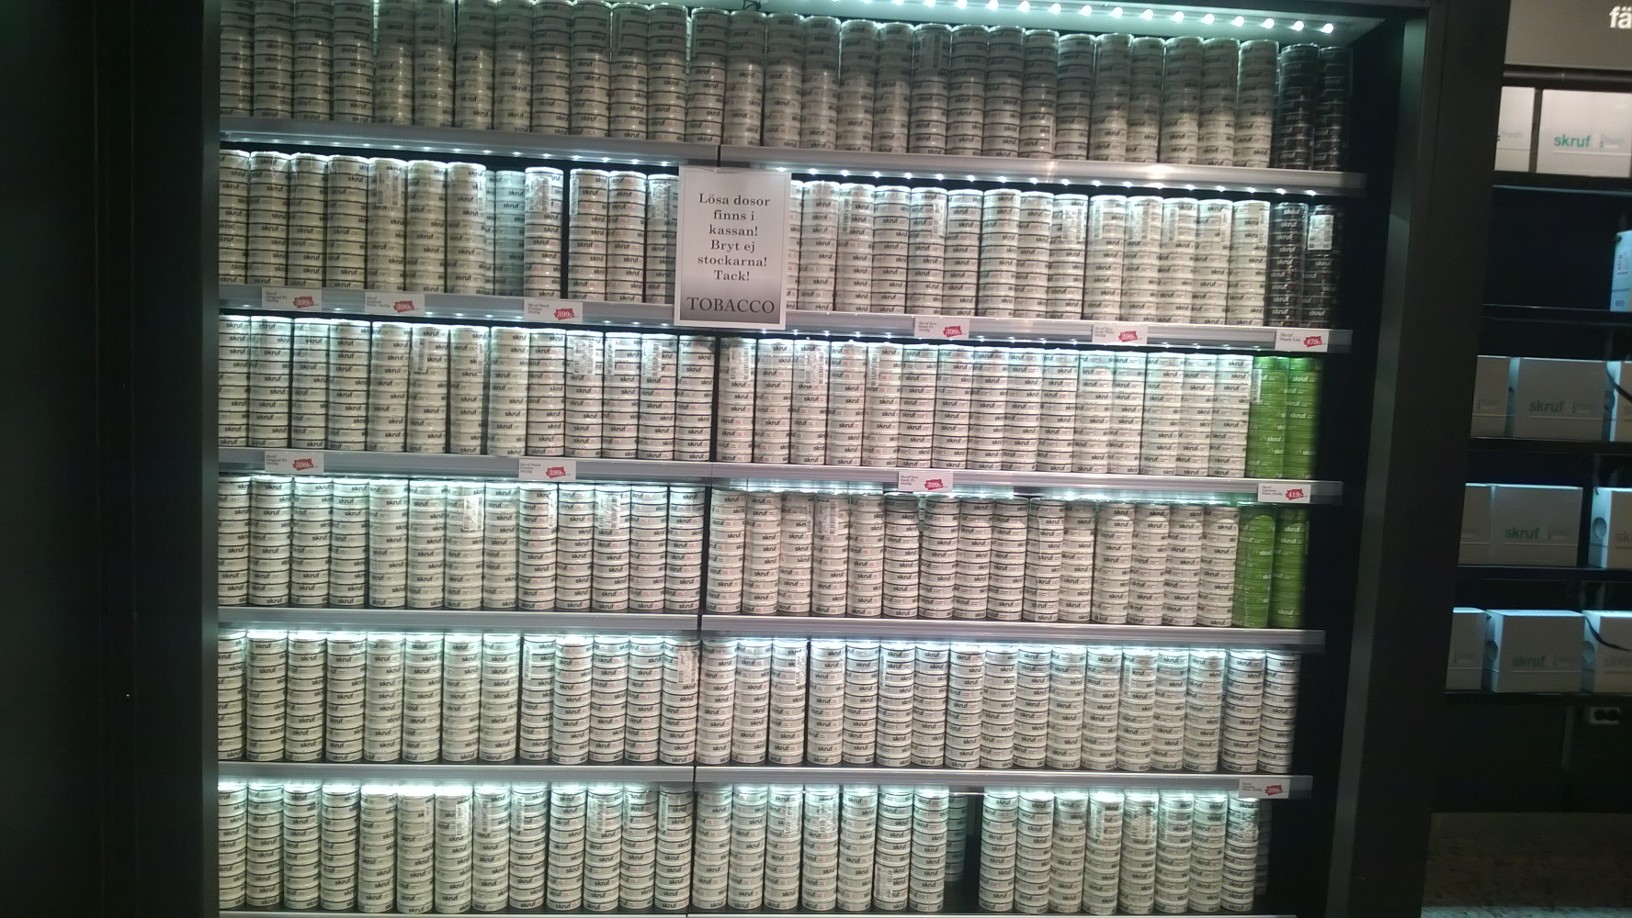 The great wall of Skruf Snus